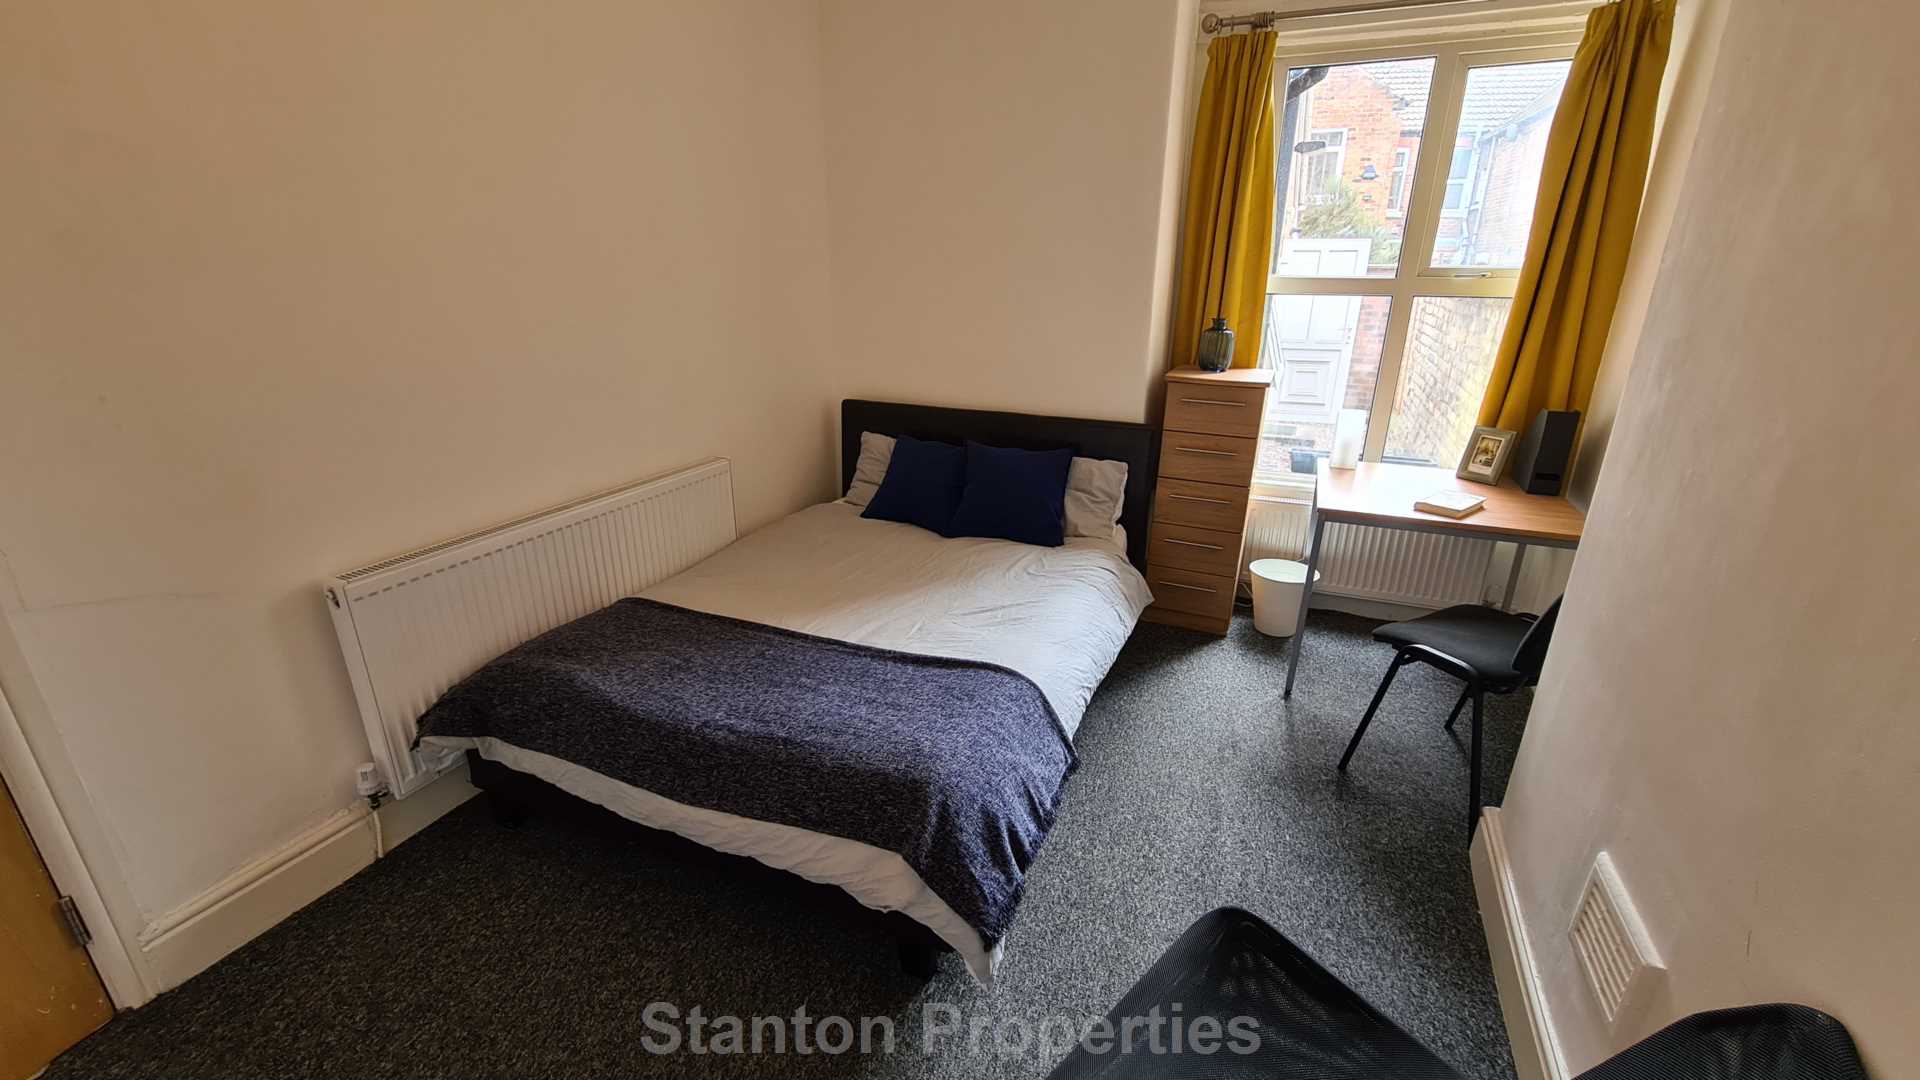 £120 pppw, See Video Tour, Mabfield Road, Manchester, Image 16